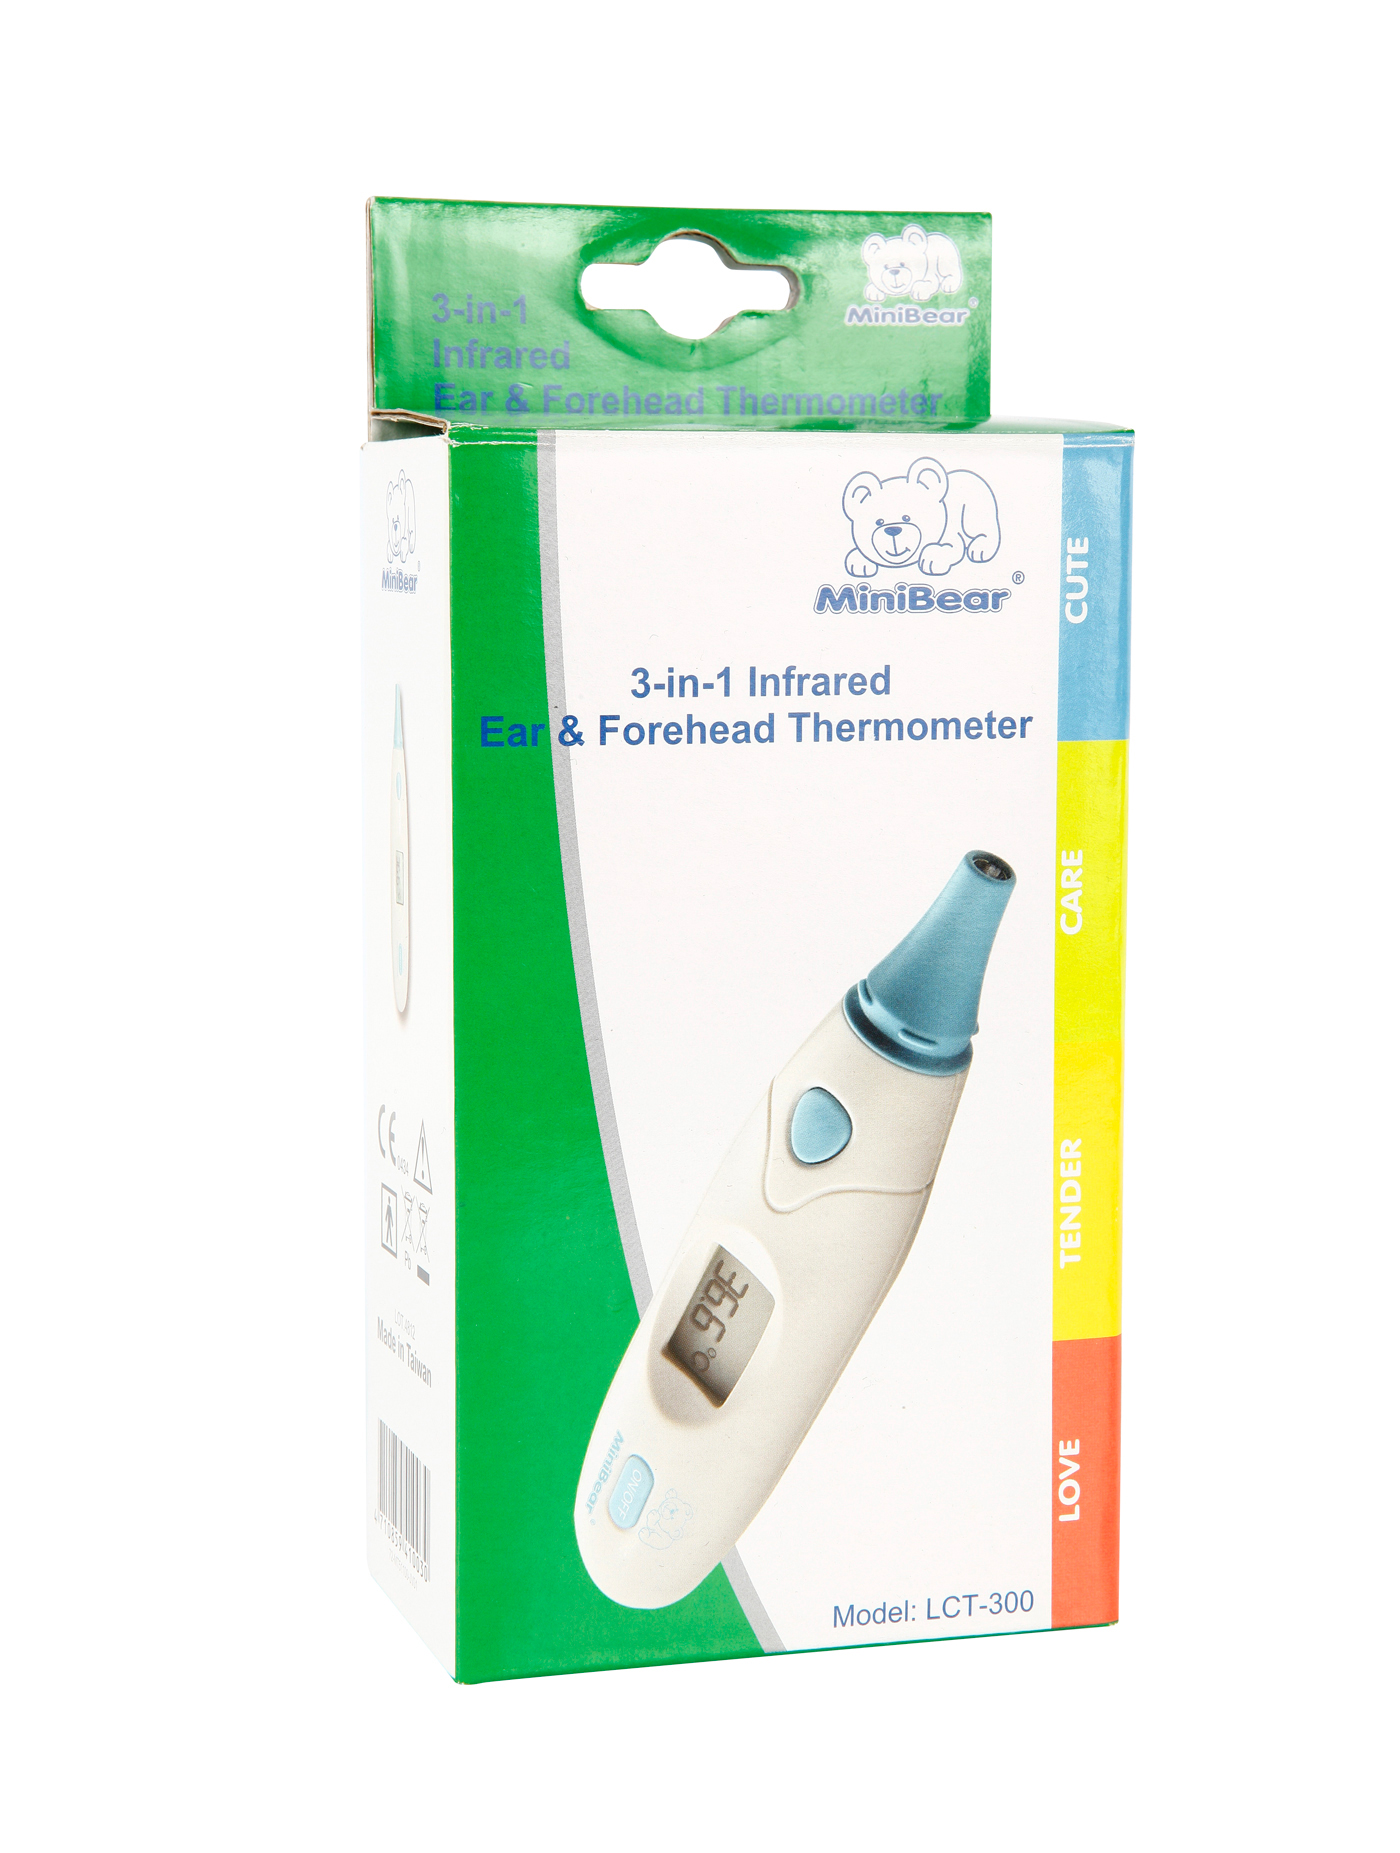 MINIBEAR 3in1 Thermometer Model LCT-300